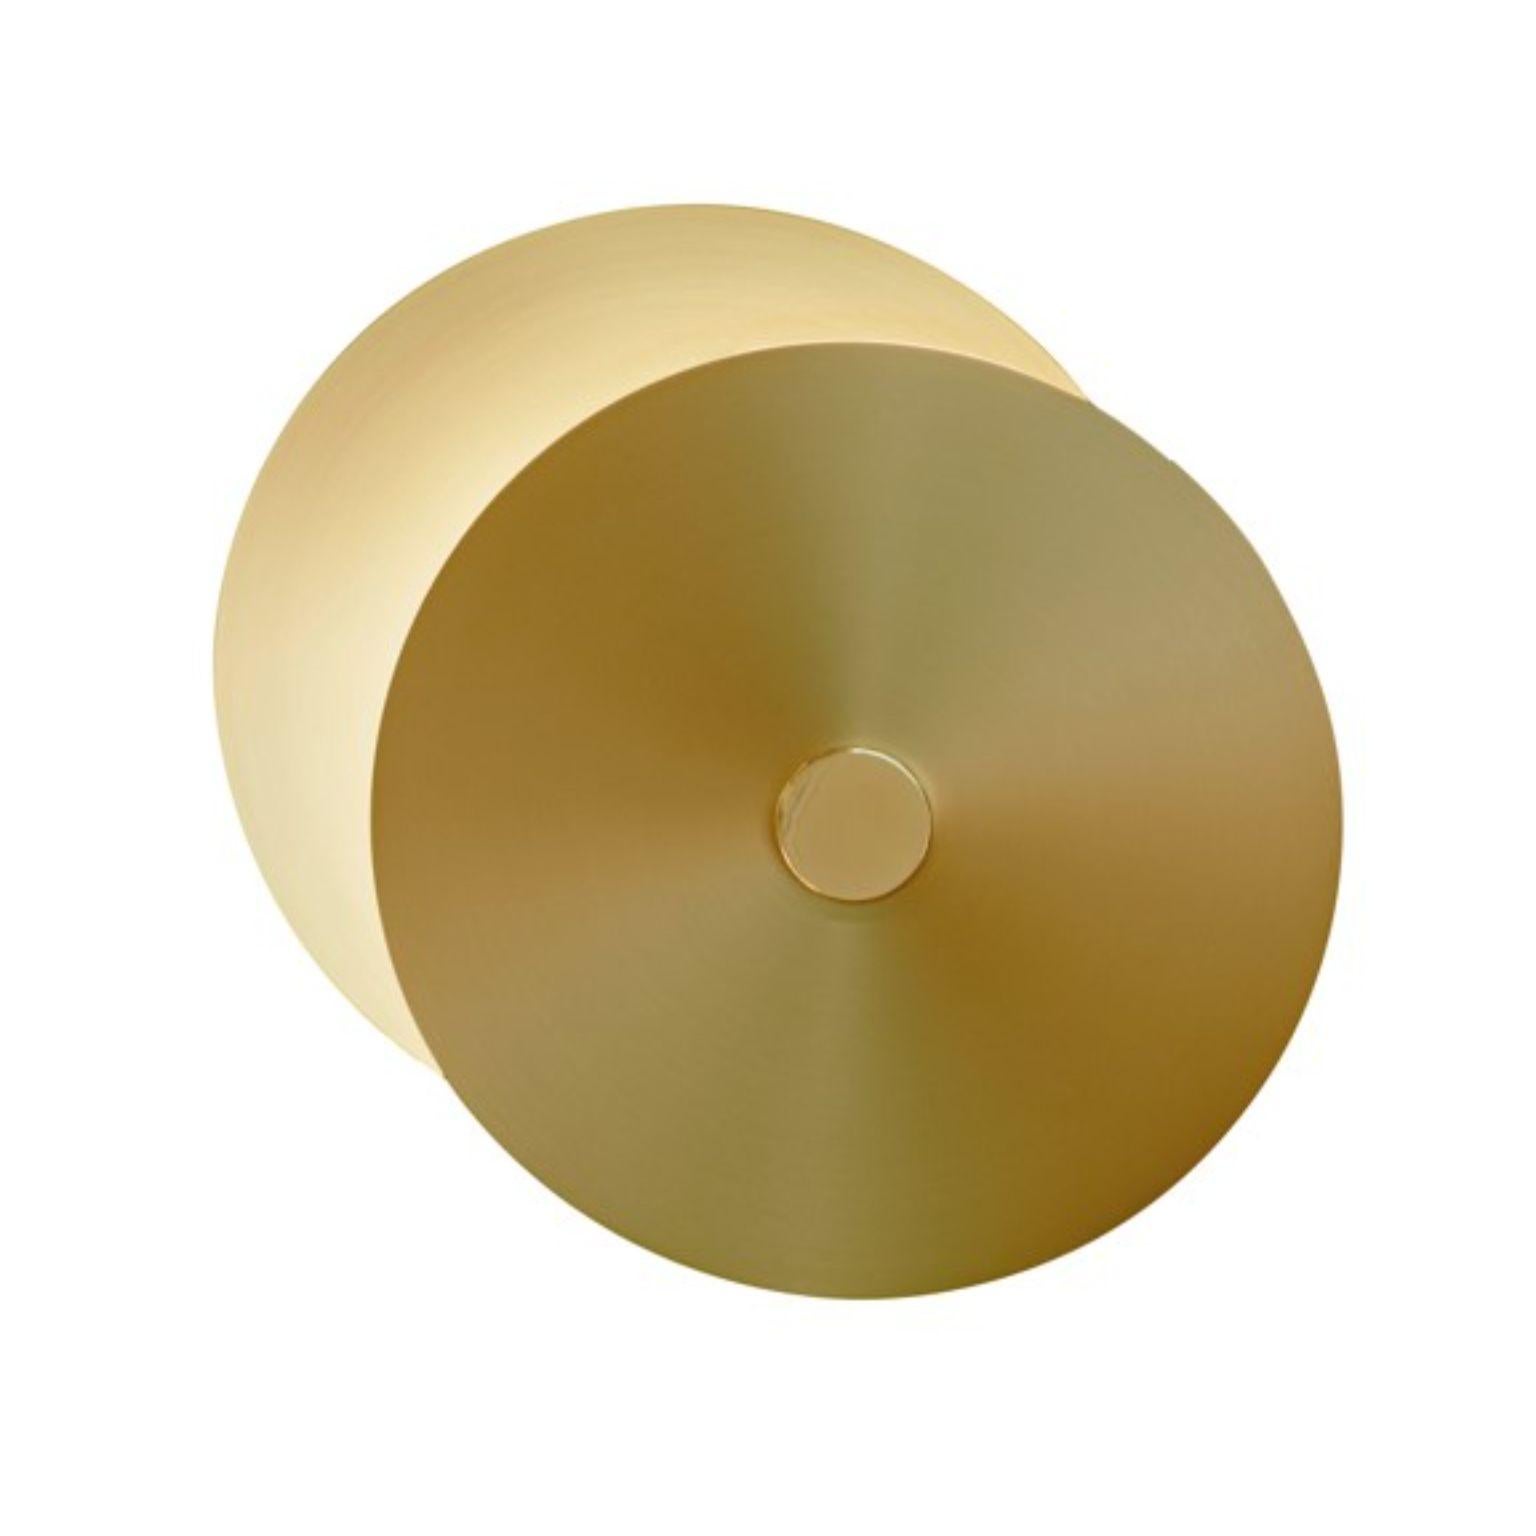 Eclipse XS wall light by Hervé Langlais
Dimensions: D36 x W6.8 x H28 cm
Materials: Solid brass.
Others finishes and dimensions are available.

All our lamps can be wired according to each country. If sold to the USA it will be wired for the USA